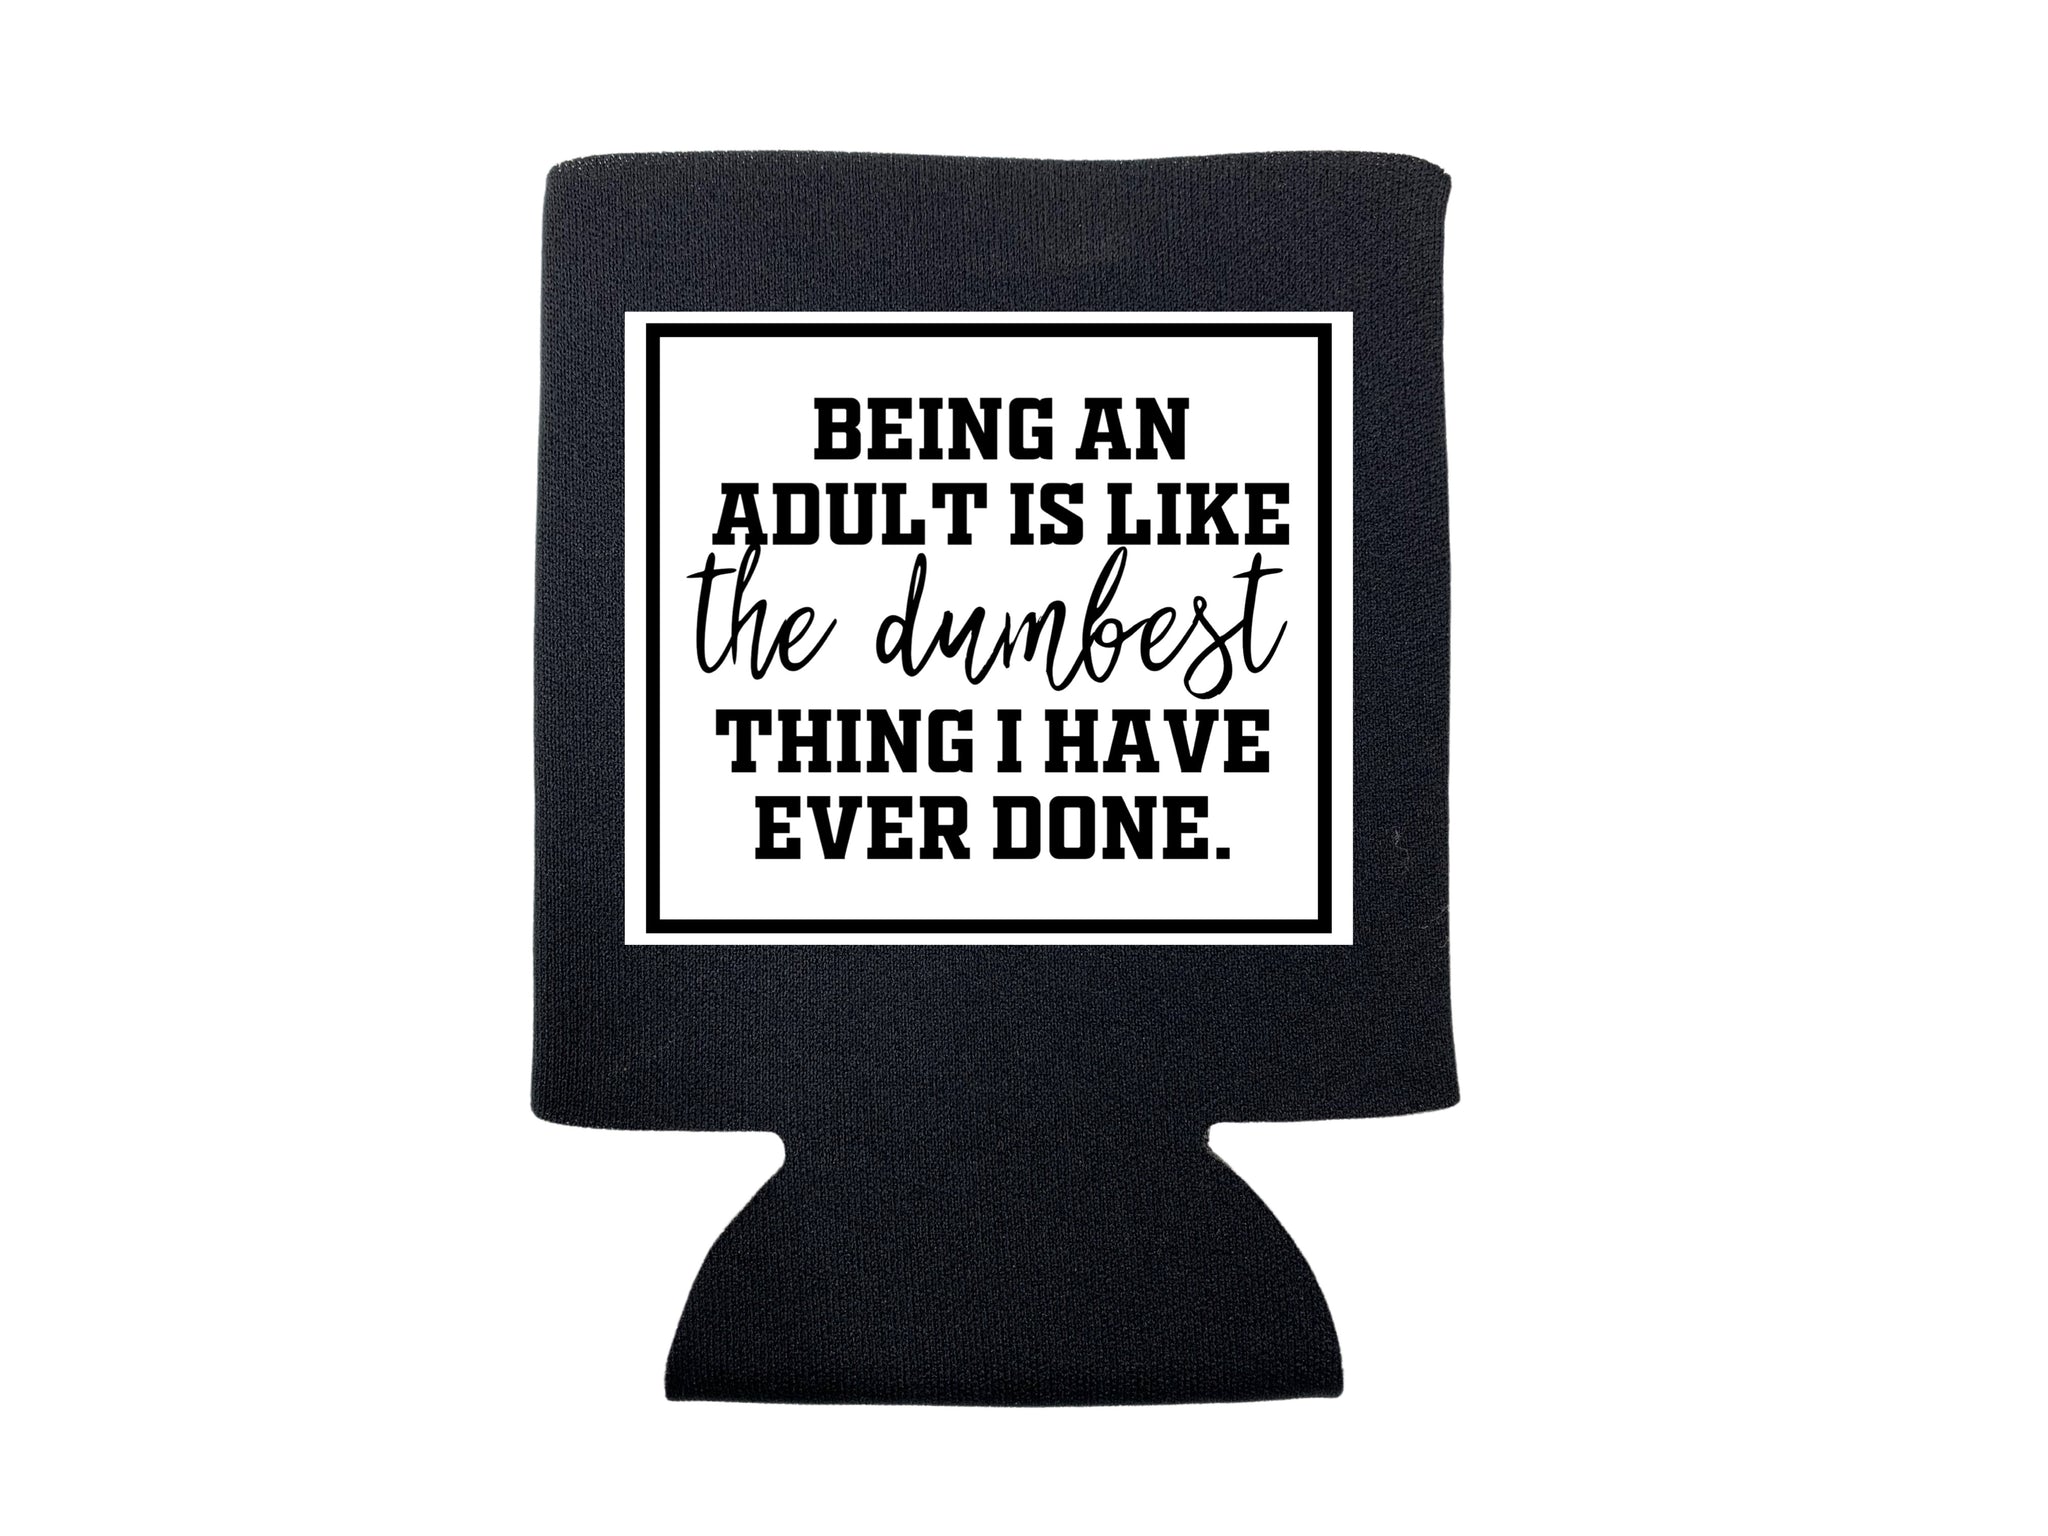 BEING AN ADULT IS LIKE THE DUMBEST THING I HAVE EVER DONE KOOZIE